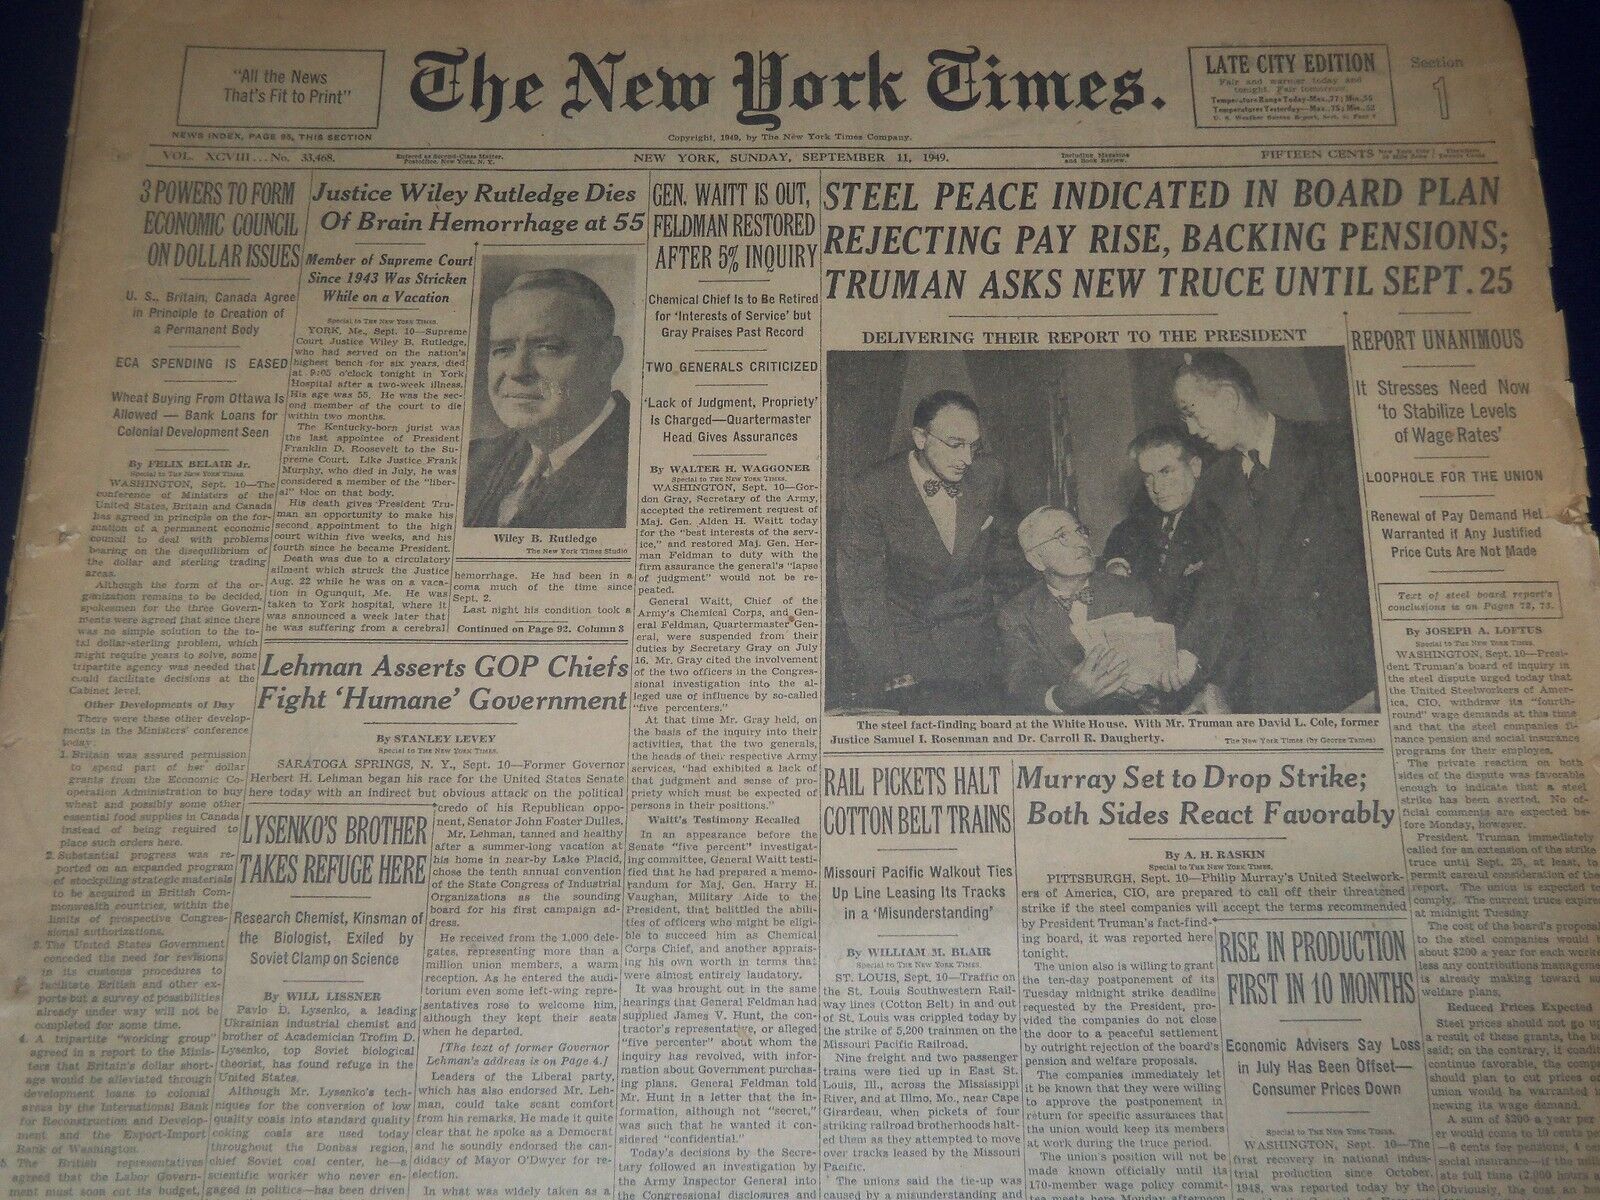 1949 SEPTEMBER 11 NEW YORK TIMES - JUSTICE WILEY RUTLEDGE DIES - NT 3668